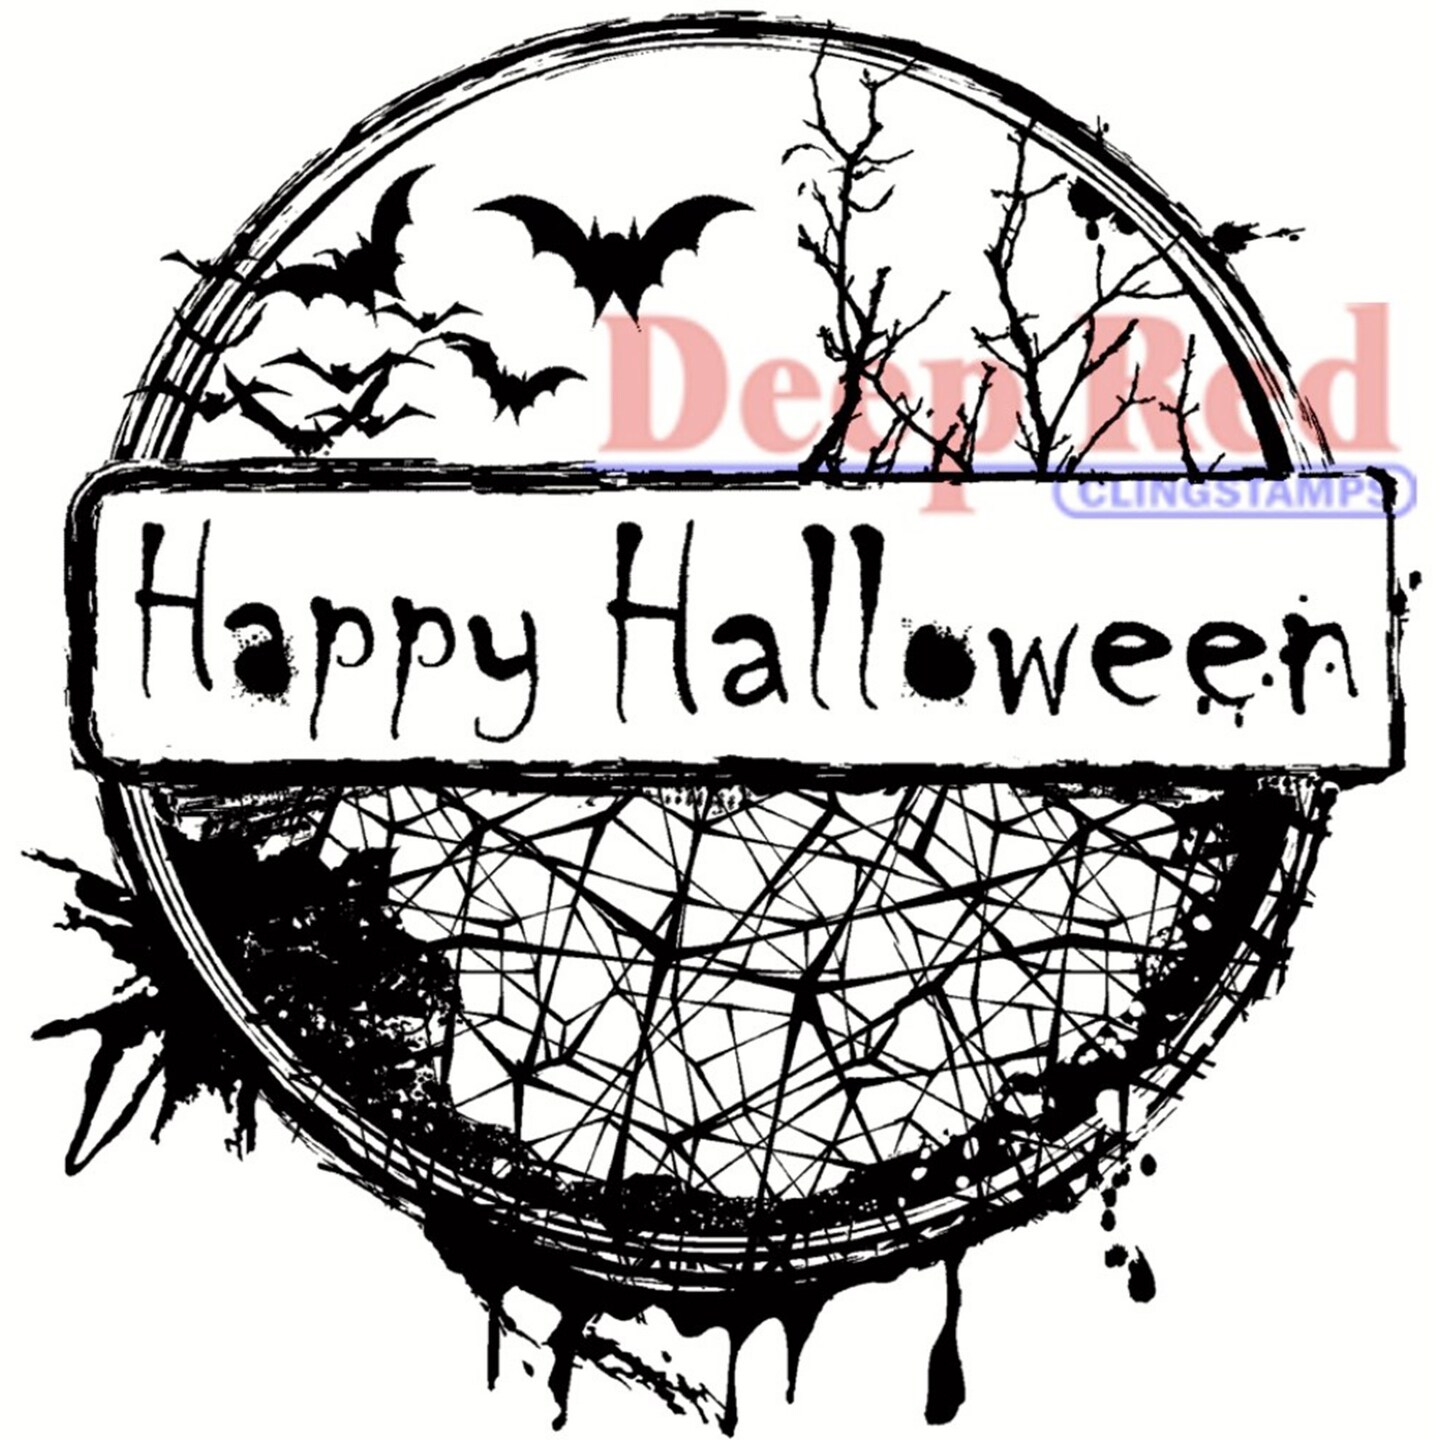 Deep Red Stamps Happy Halloween Rubber Cling Stamp 3 x 3.2 inches